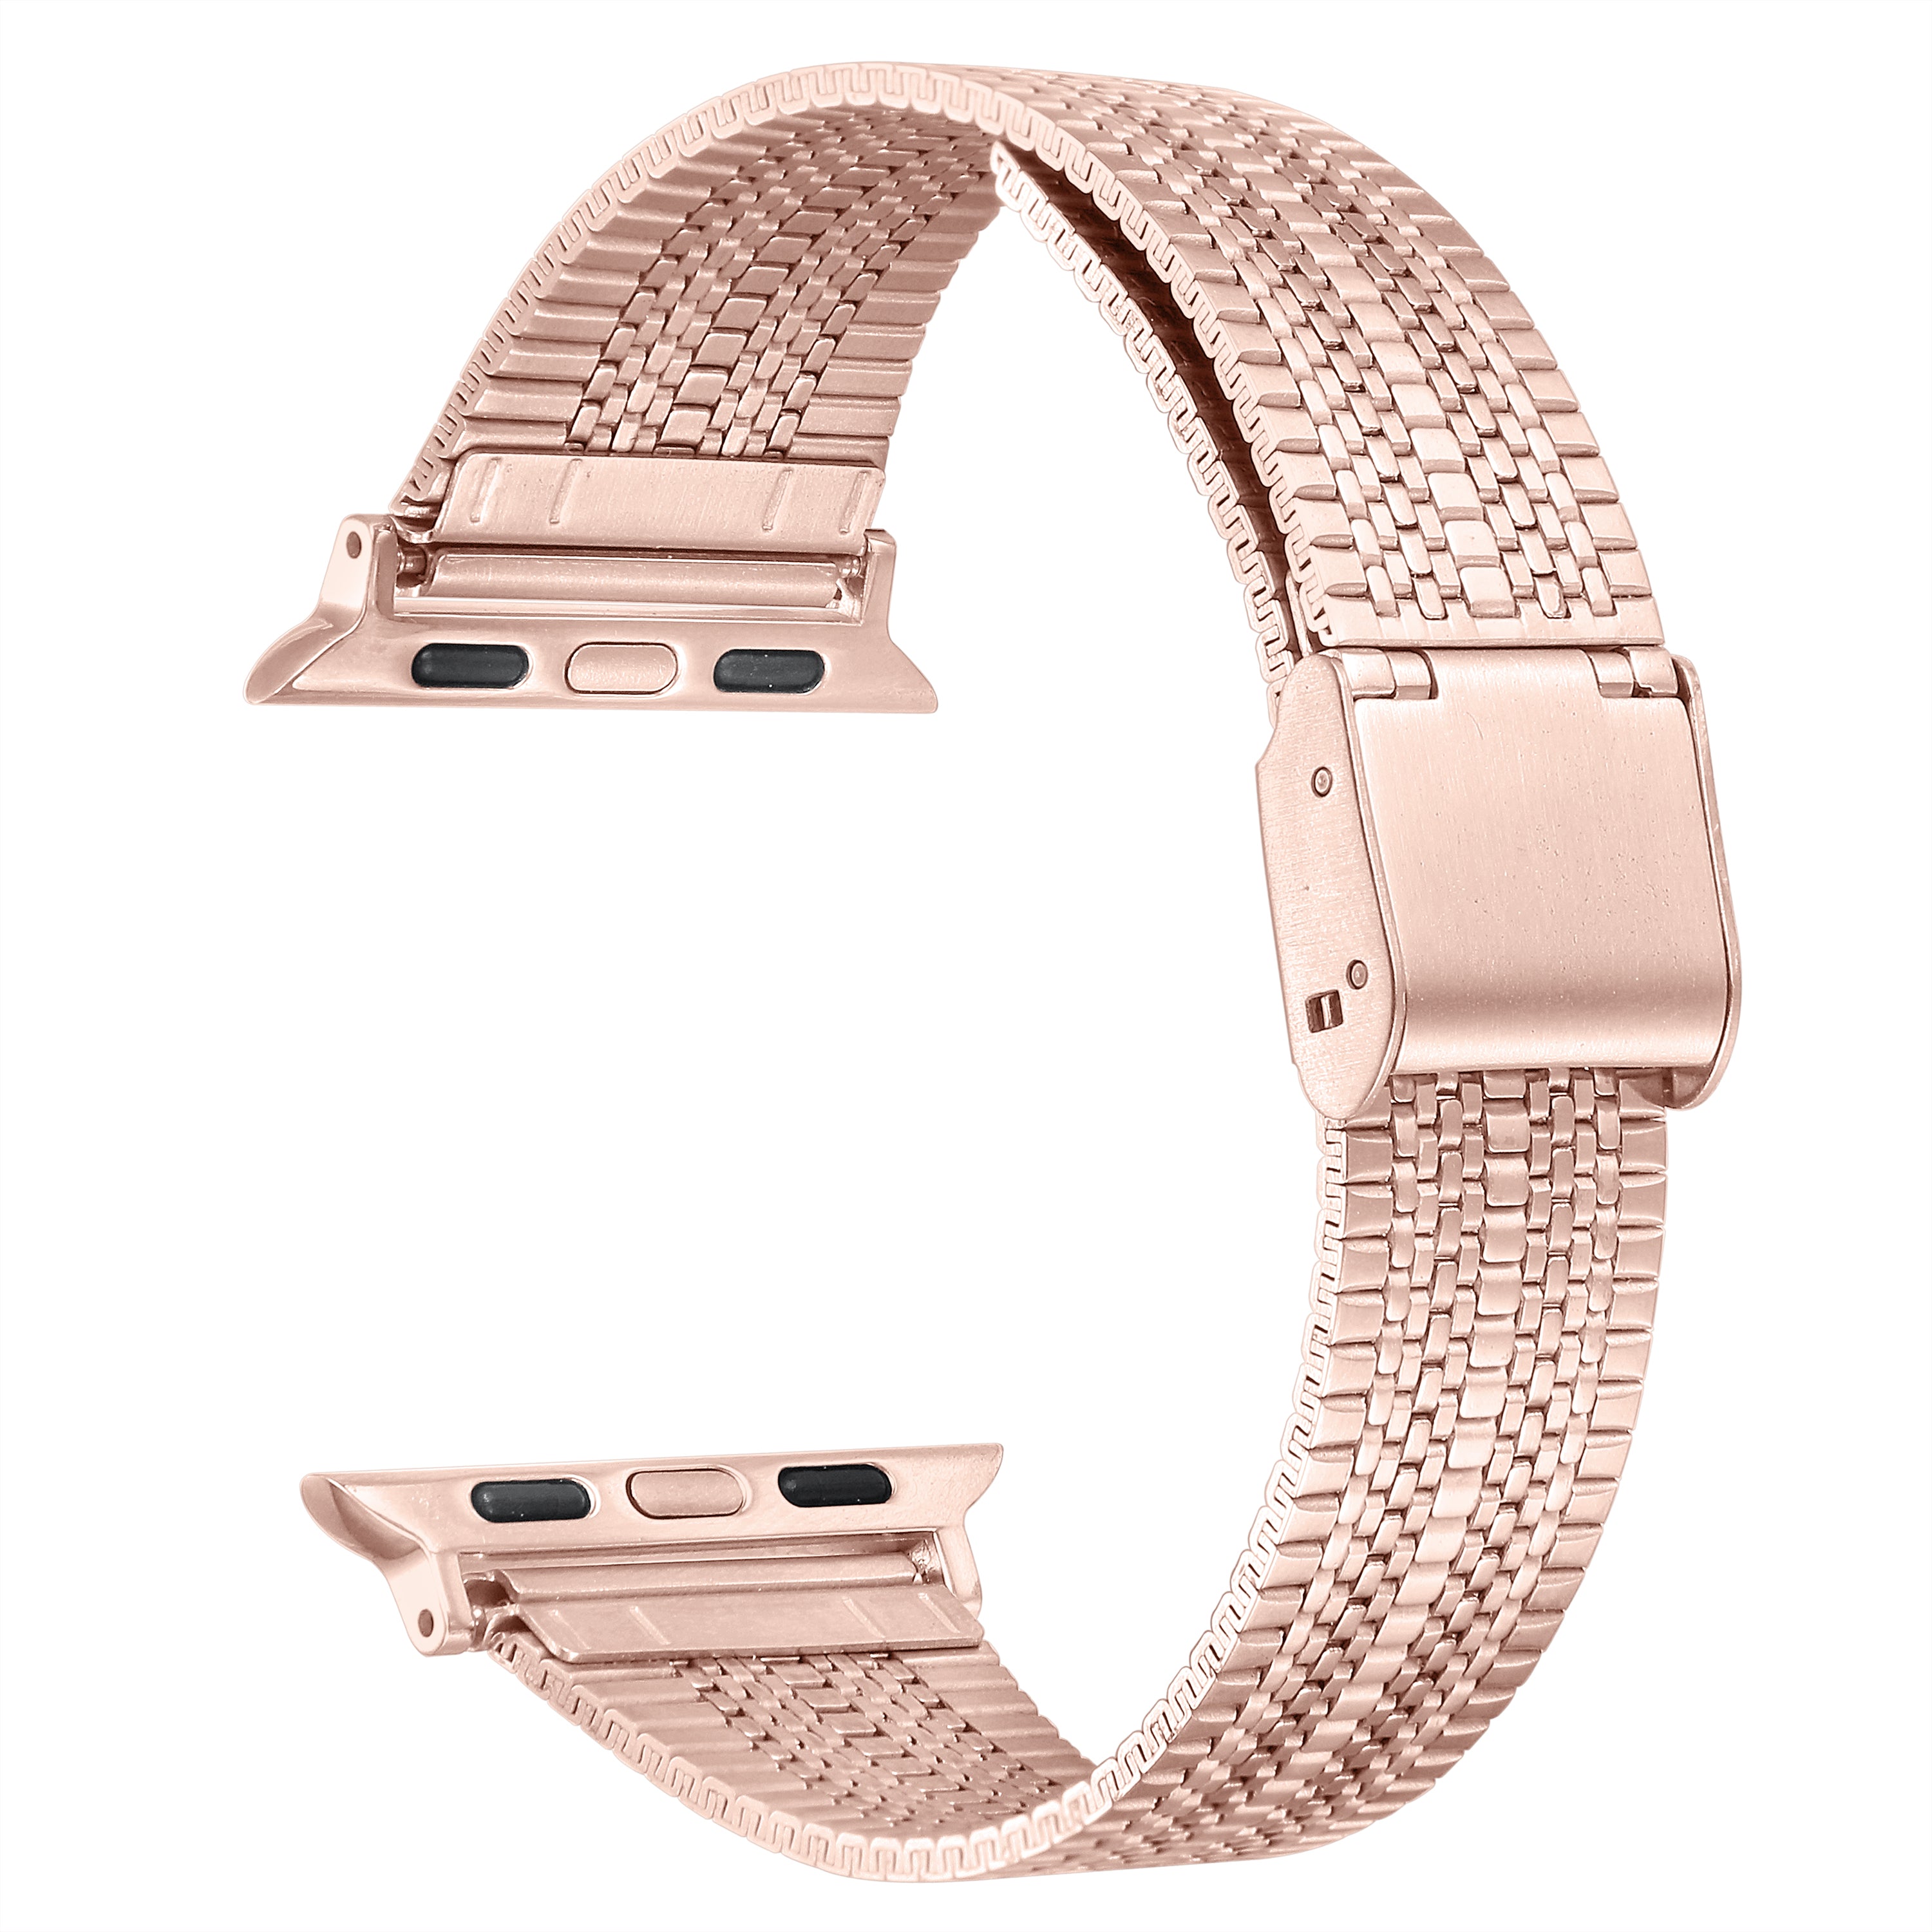 Posh Tech Unisex Eliza Stainless Steel Band for Apple Watch Series 1-8 & SE Sizes 42-49mm-Rose Gold - image 2 of 4